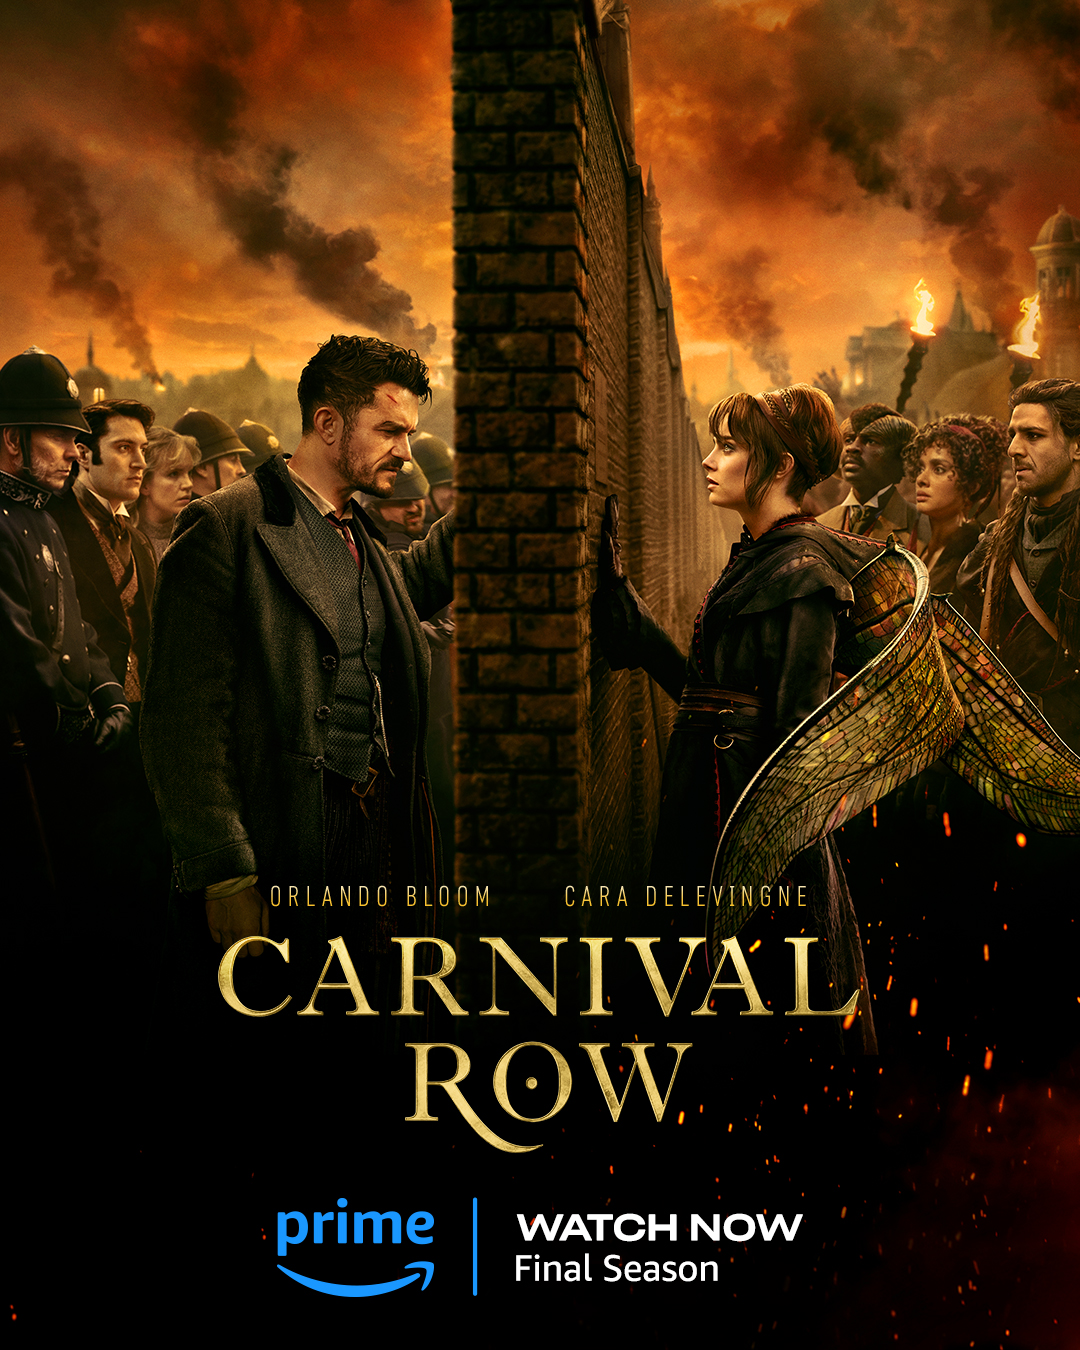 Joanne Whalley and Arty Froushan star in Carnival Row Season 2 ...